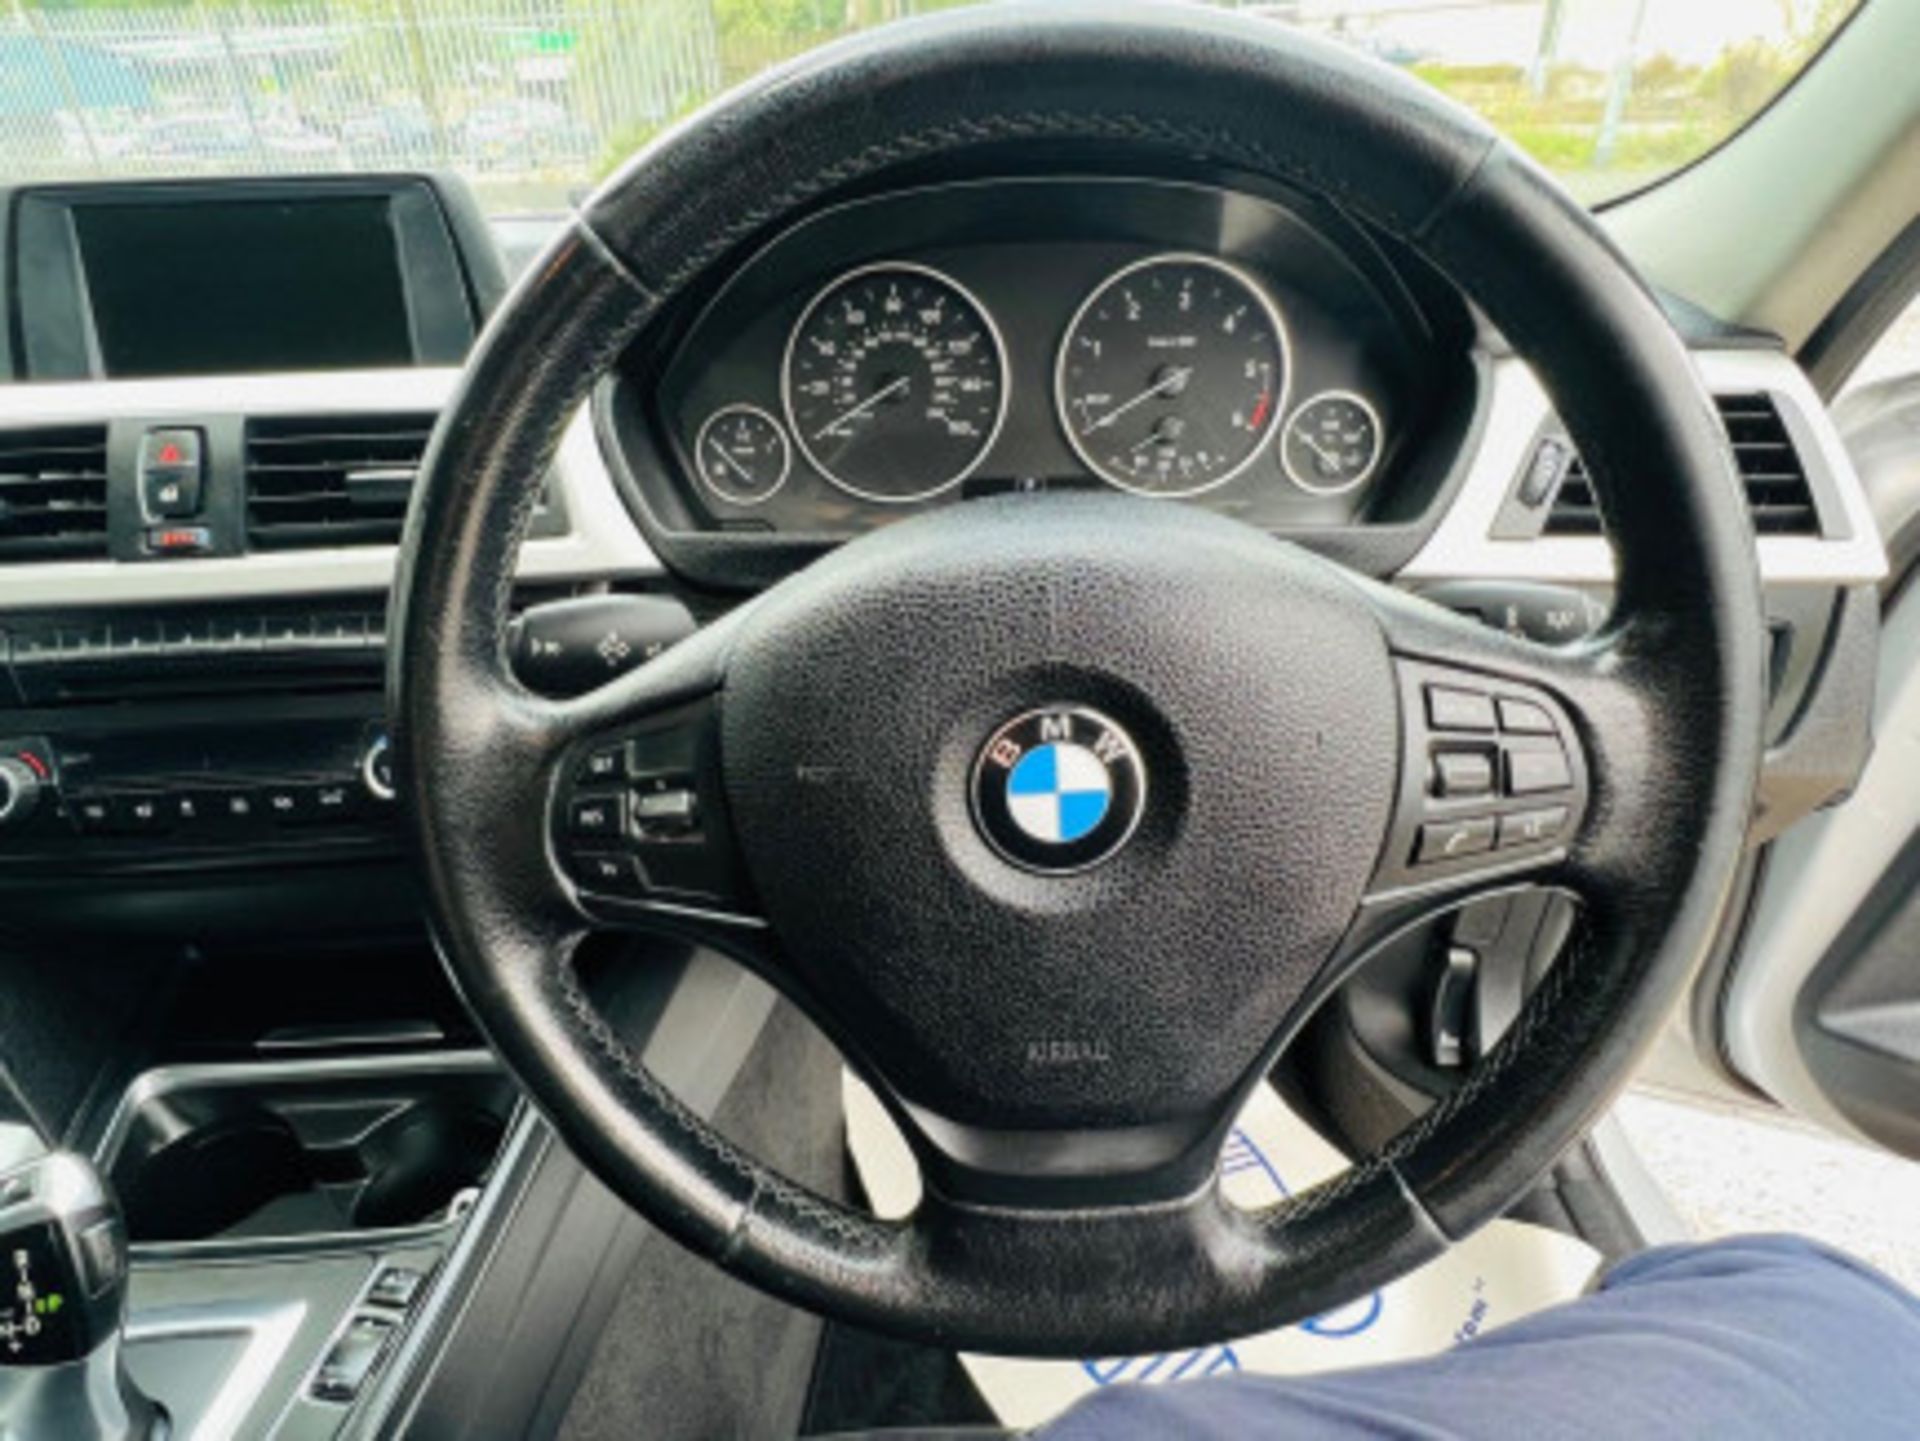 BMW 3 SERIES 2.0 DIESEL ED START STOP - A WELL-MAINTAINED GEM >>--NO VAT ON HAMMER--<< - Image 21 of 229